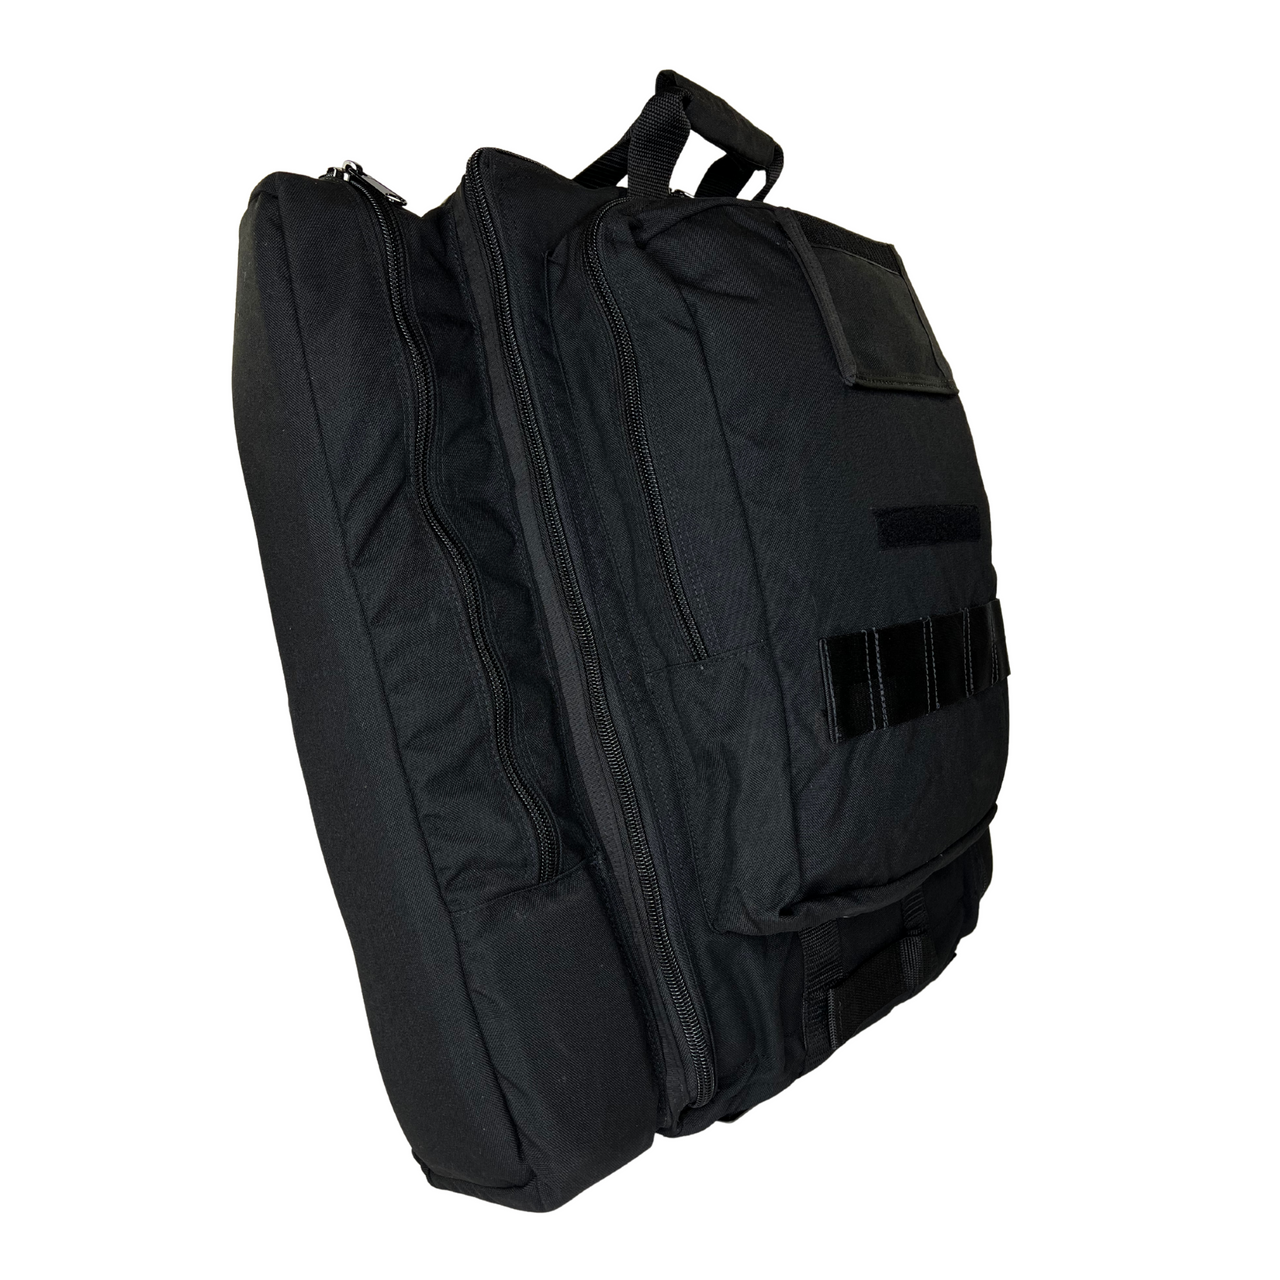 Trauma/Medic Bags: RB S500-P BLACK POUCH WITH WINDOW